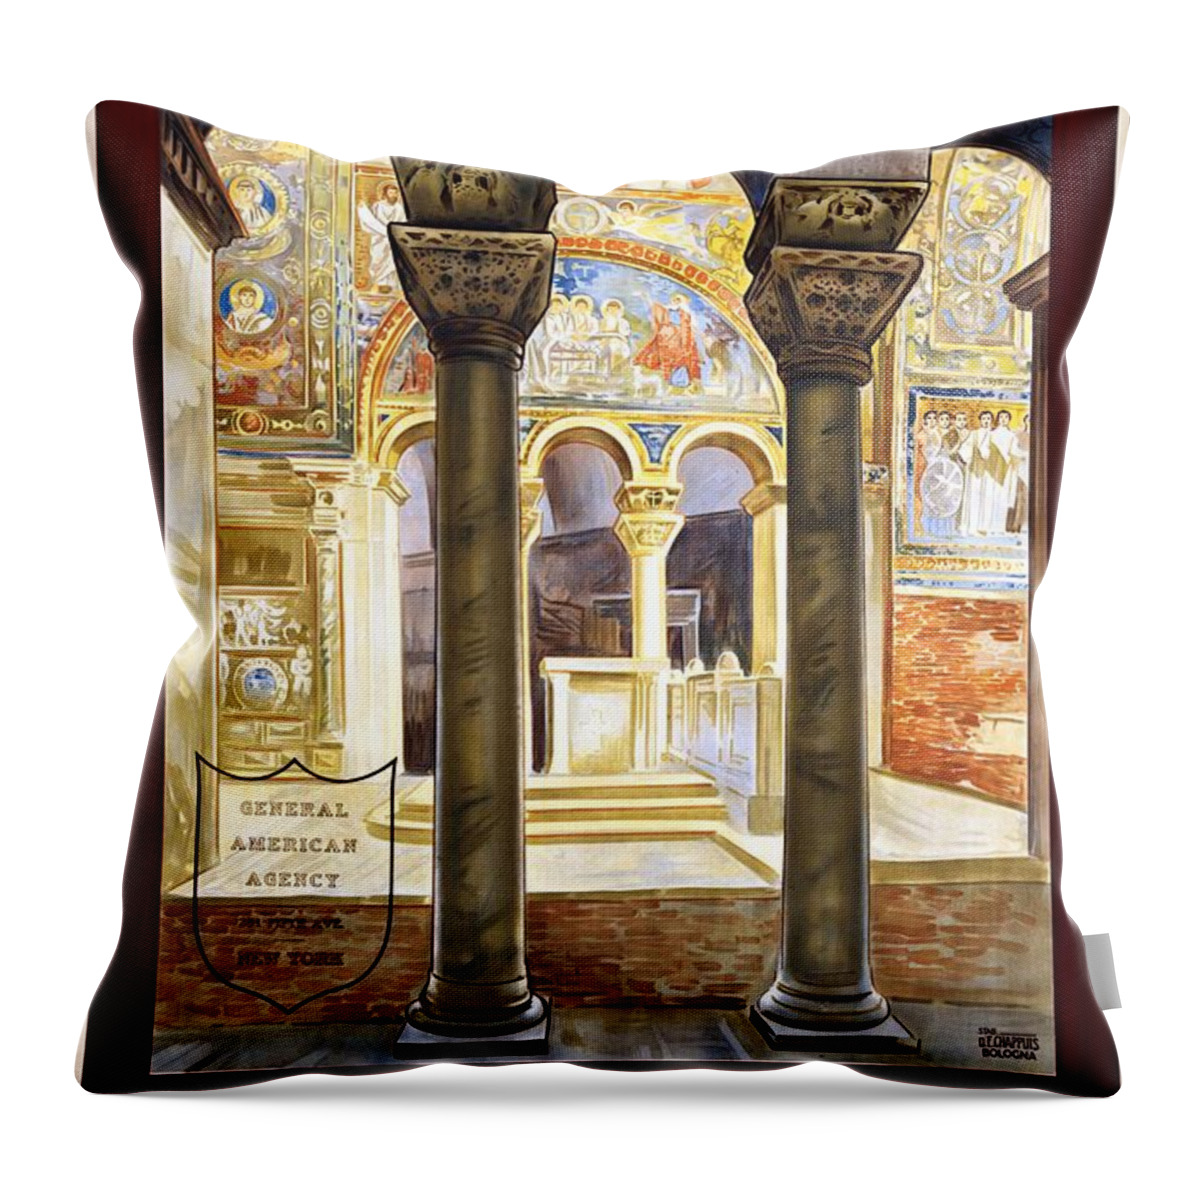 Ravenna Throw Pillow featuring the painting Ravenna, travel poster 1925 by Vincent Monozlay